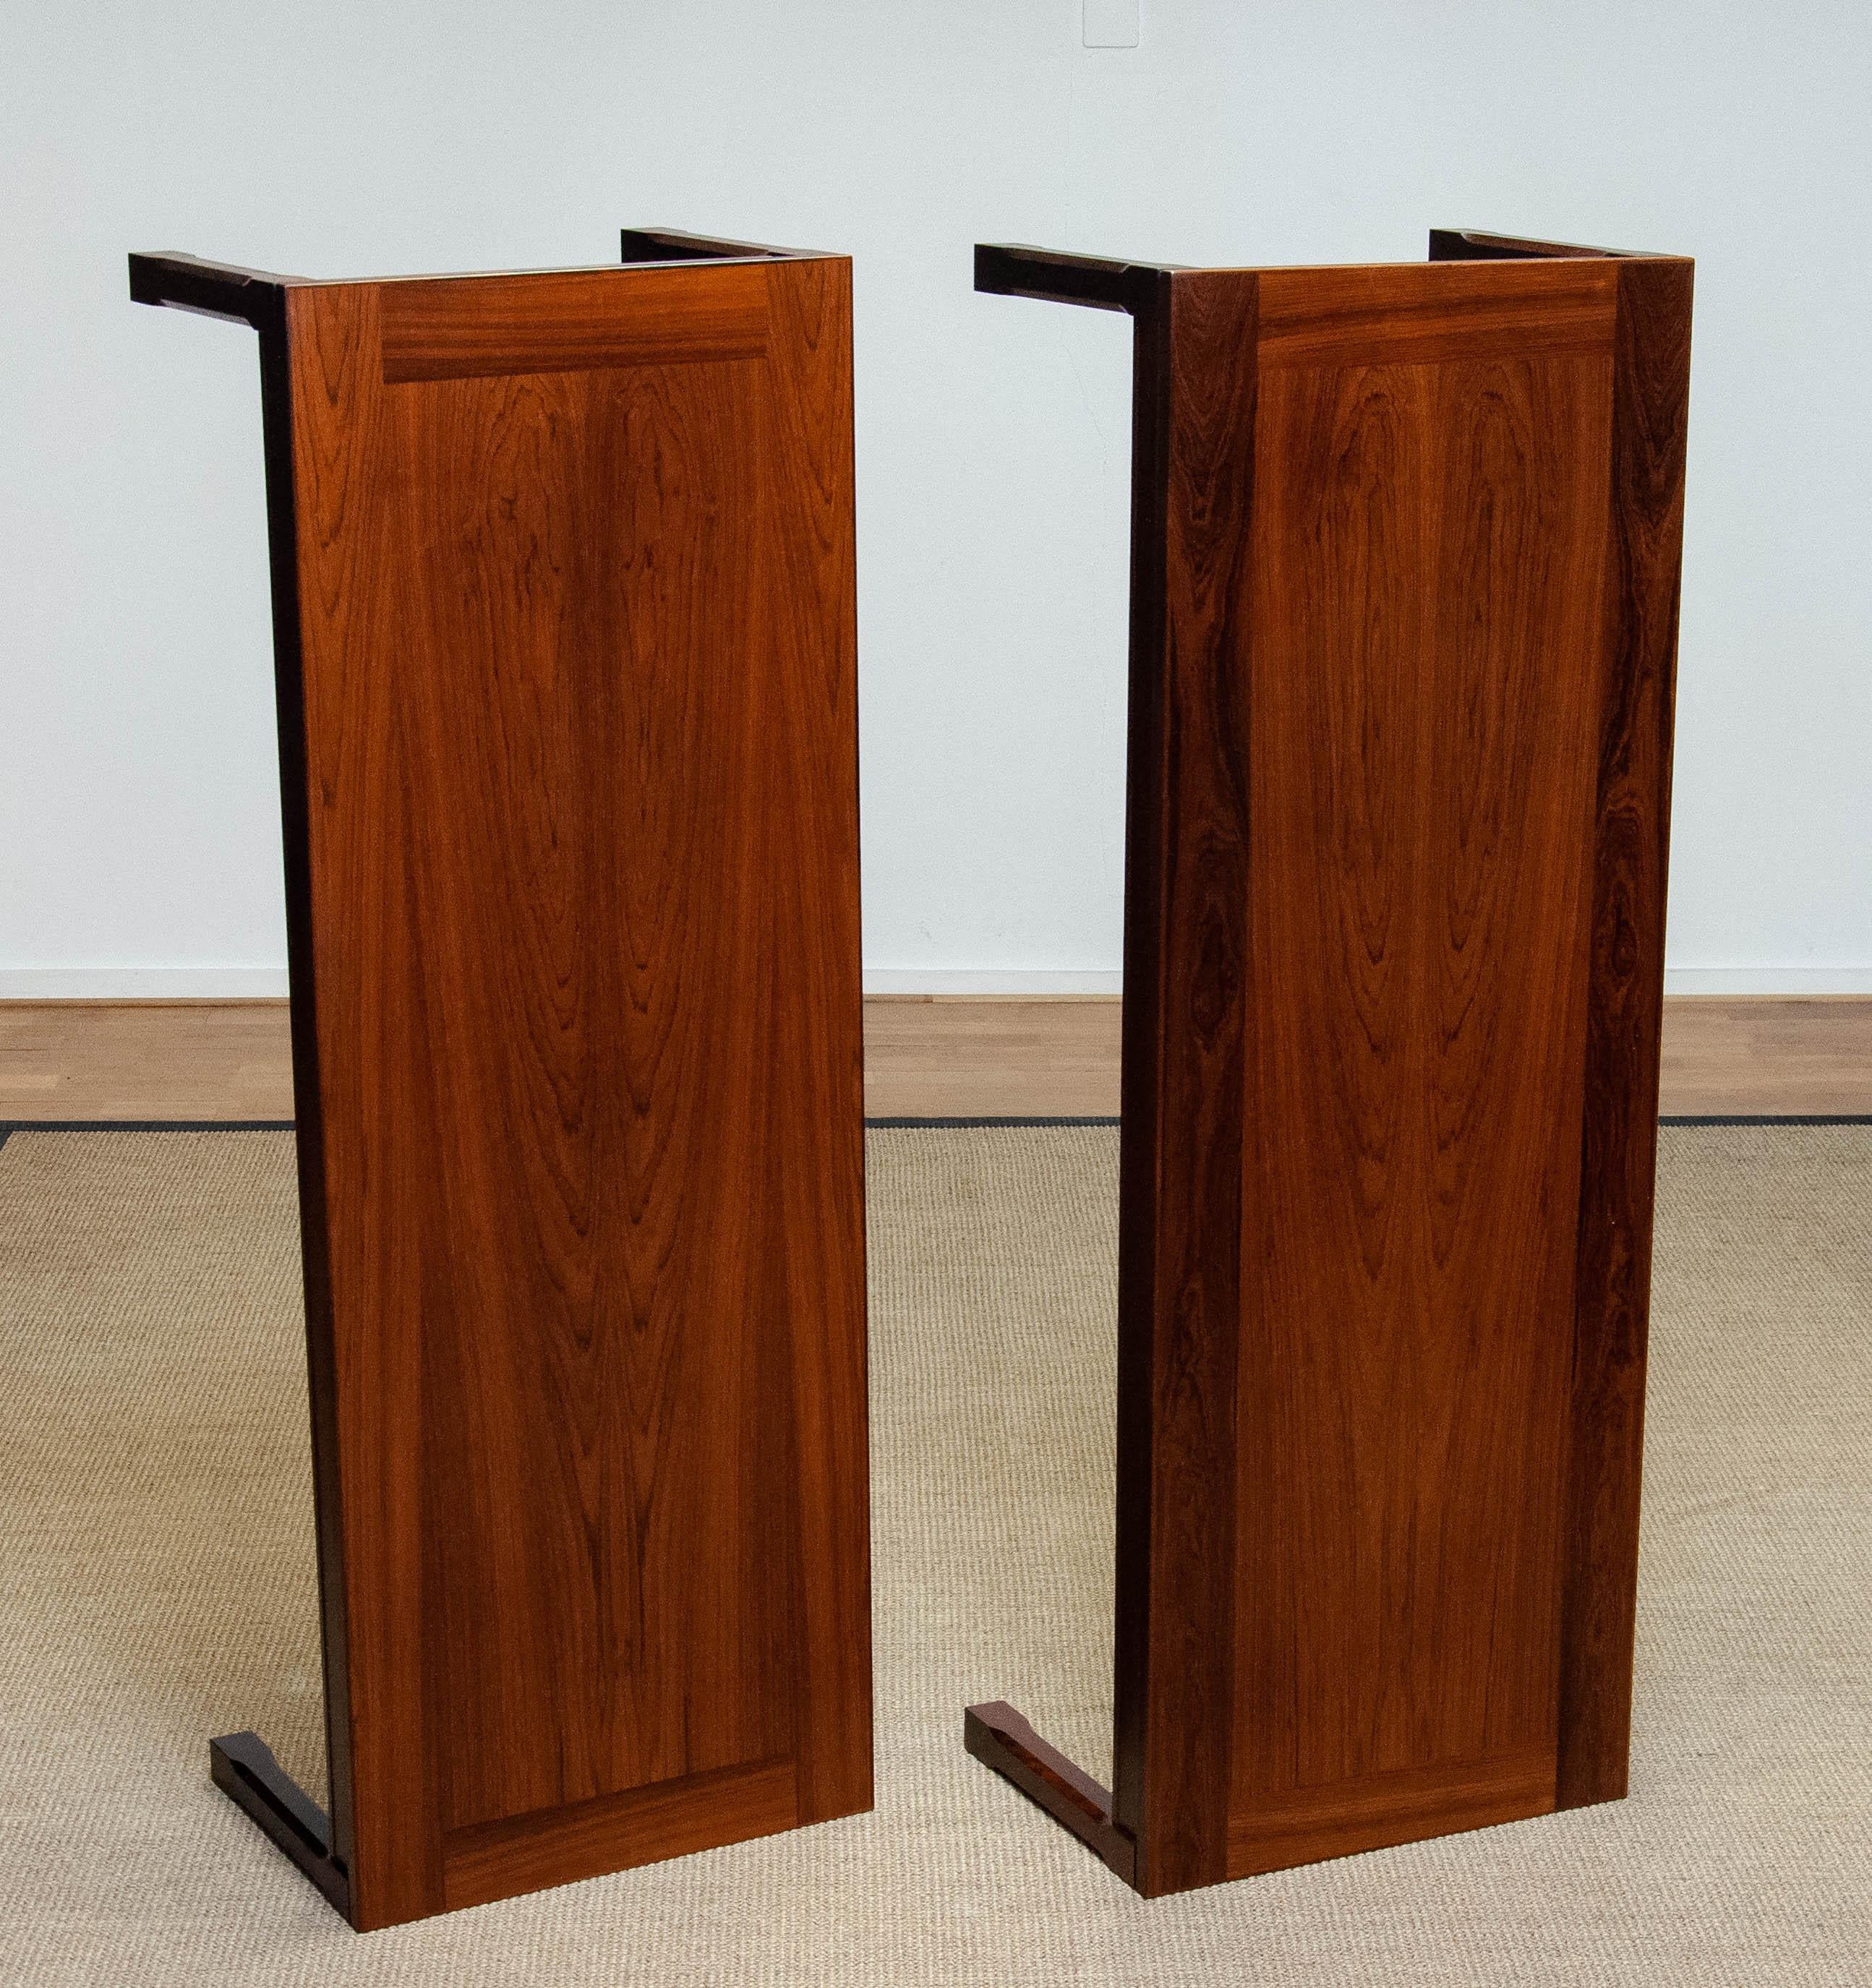 60s Hovering Rosewood Wall Mounted Cabinets Shelfs With Two Matching Side Tables For Sale 3